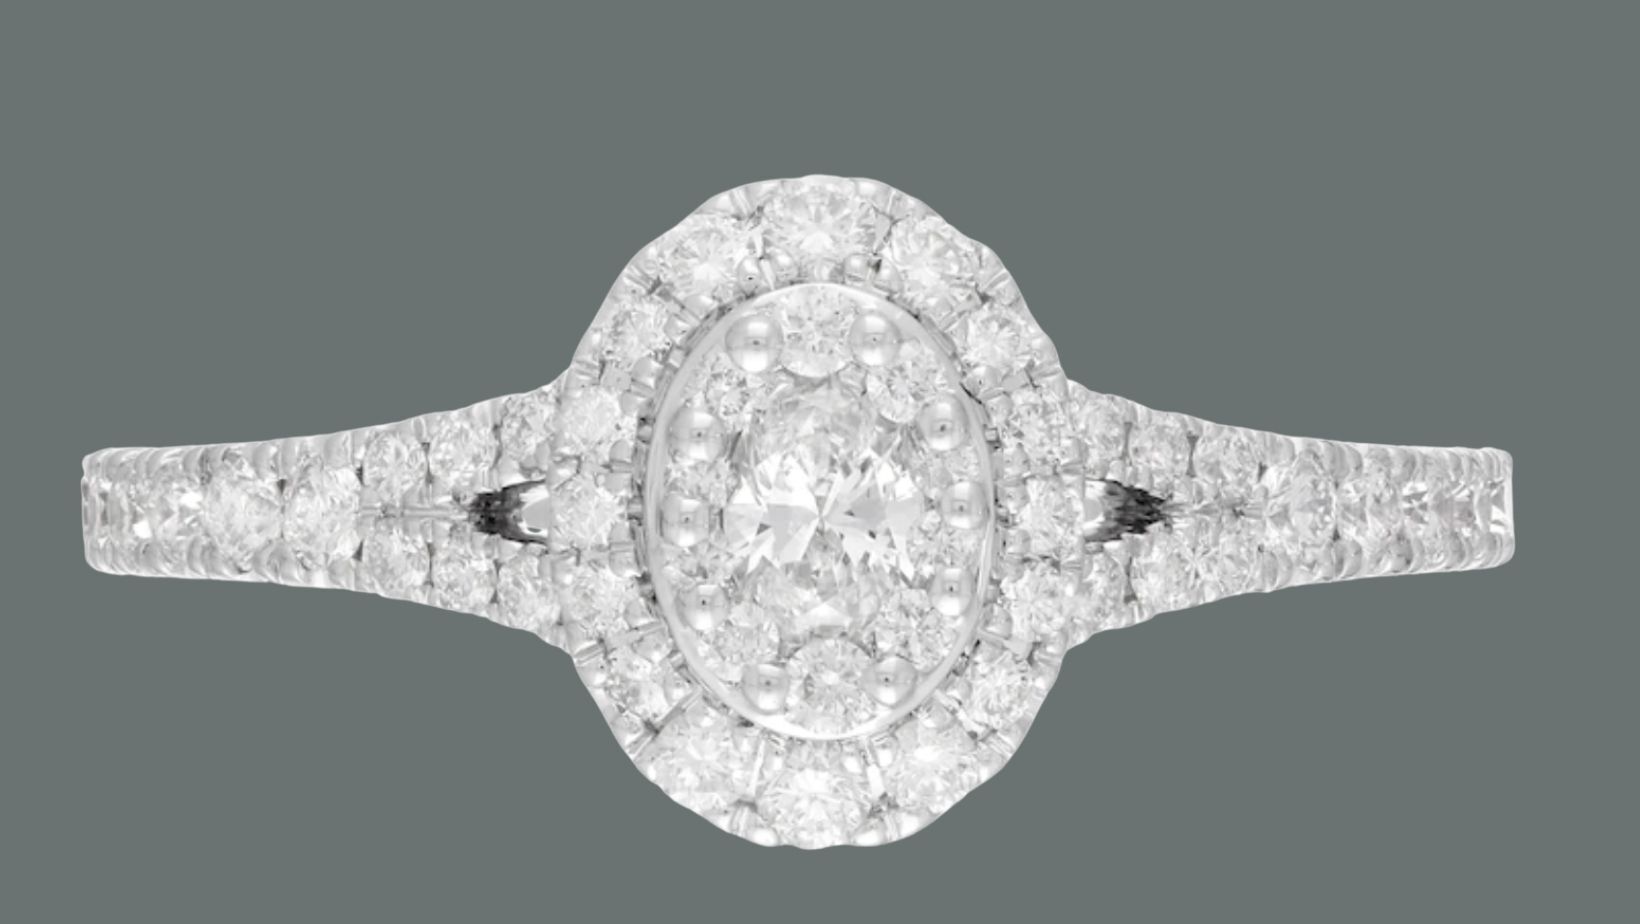 Neil Lane oval diamond engagement ring from Kay Jewelers' Neil Lane bridal collection